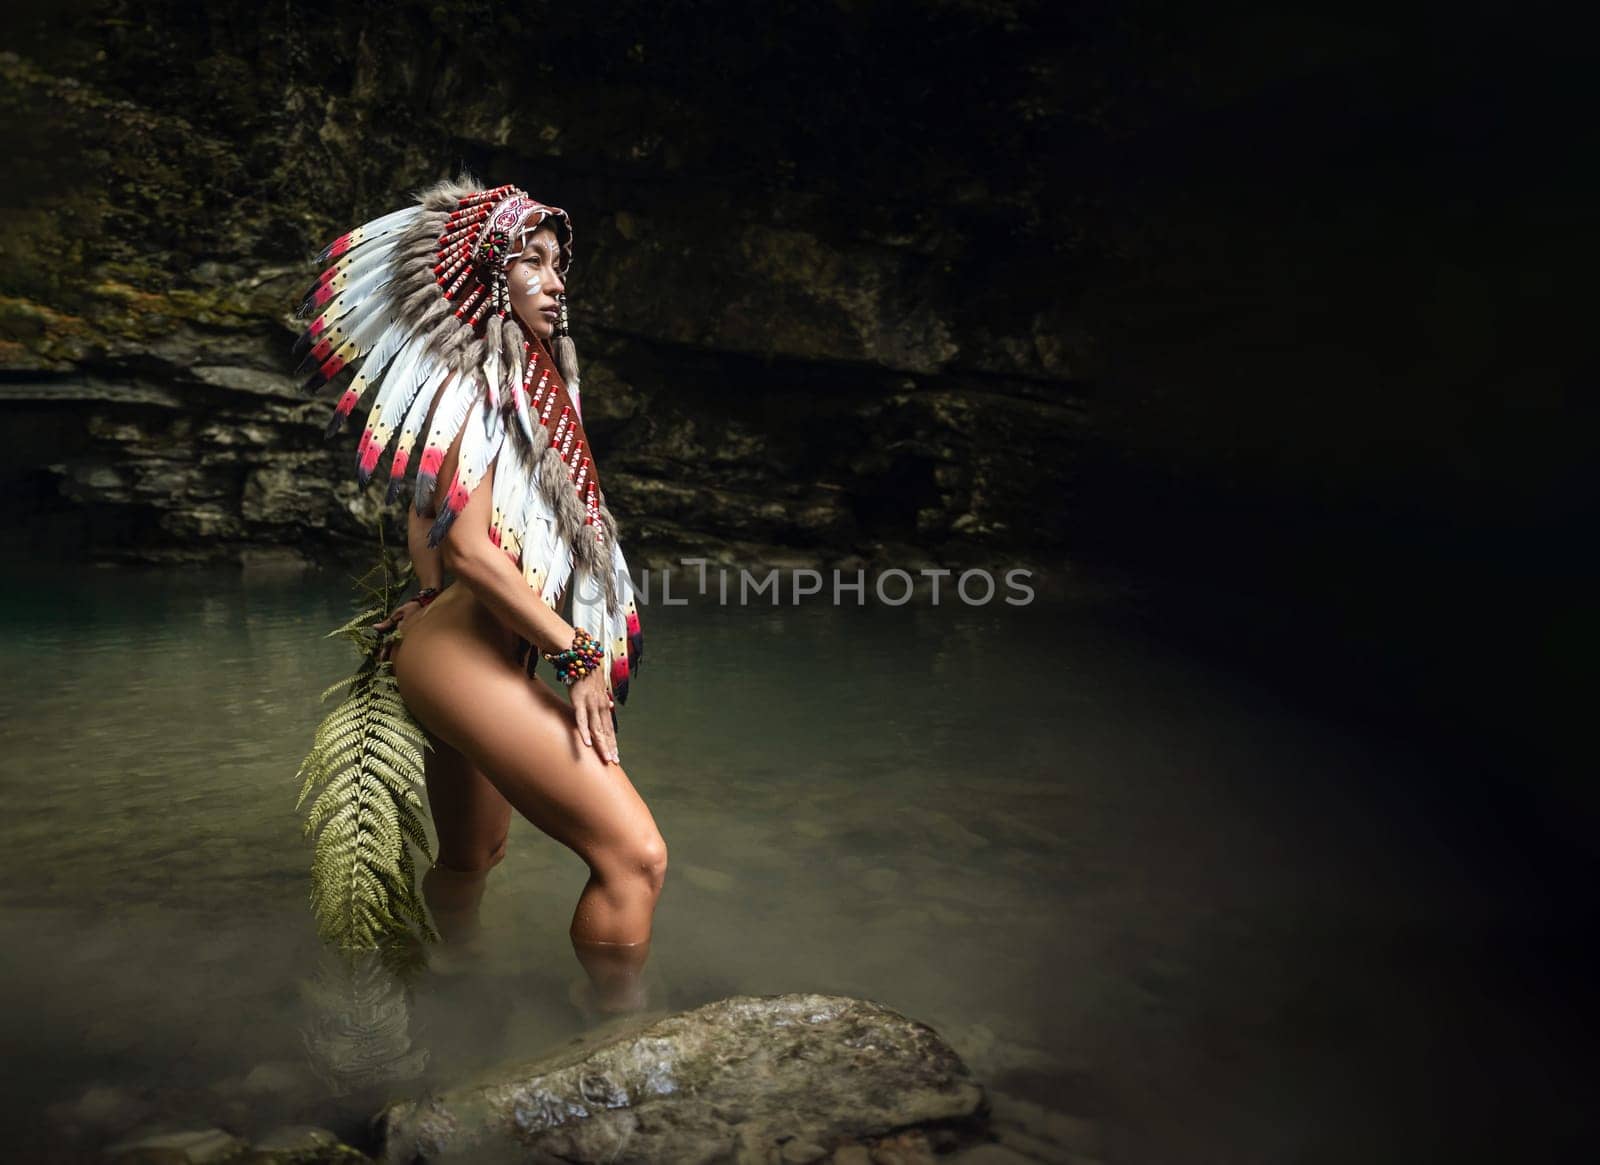 Naked girl in Native American headdresses poses sexually against the backdrop of wildlife with fern